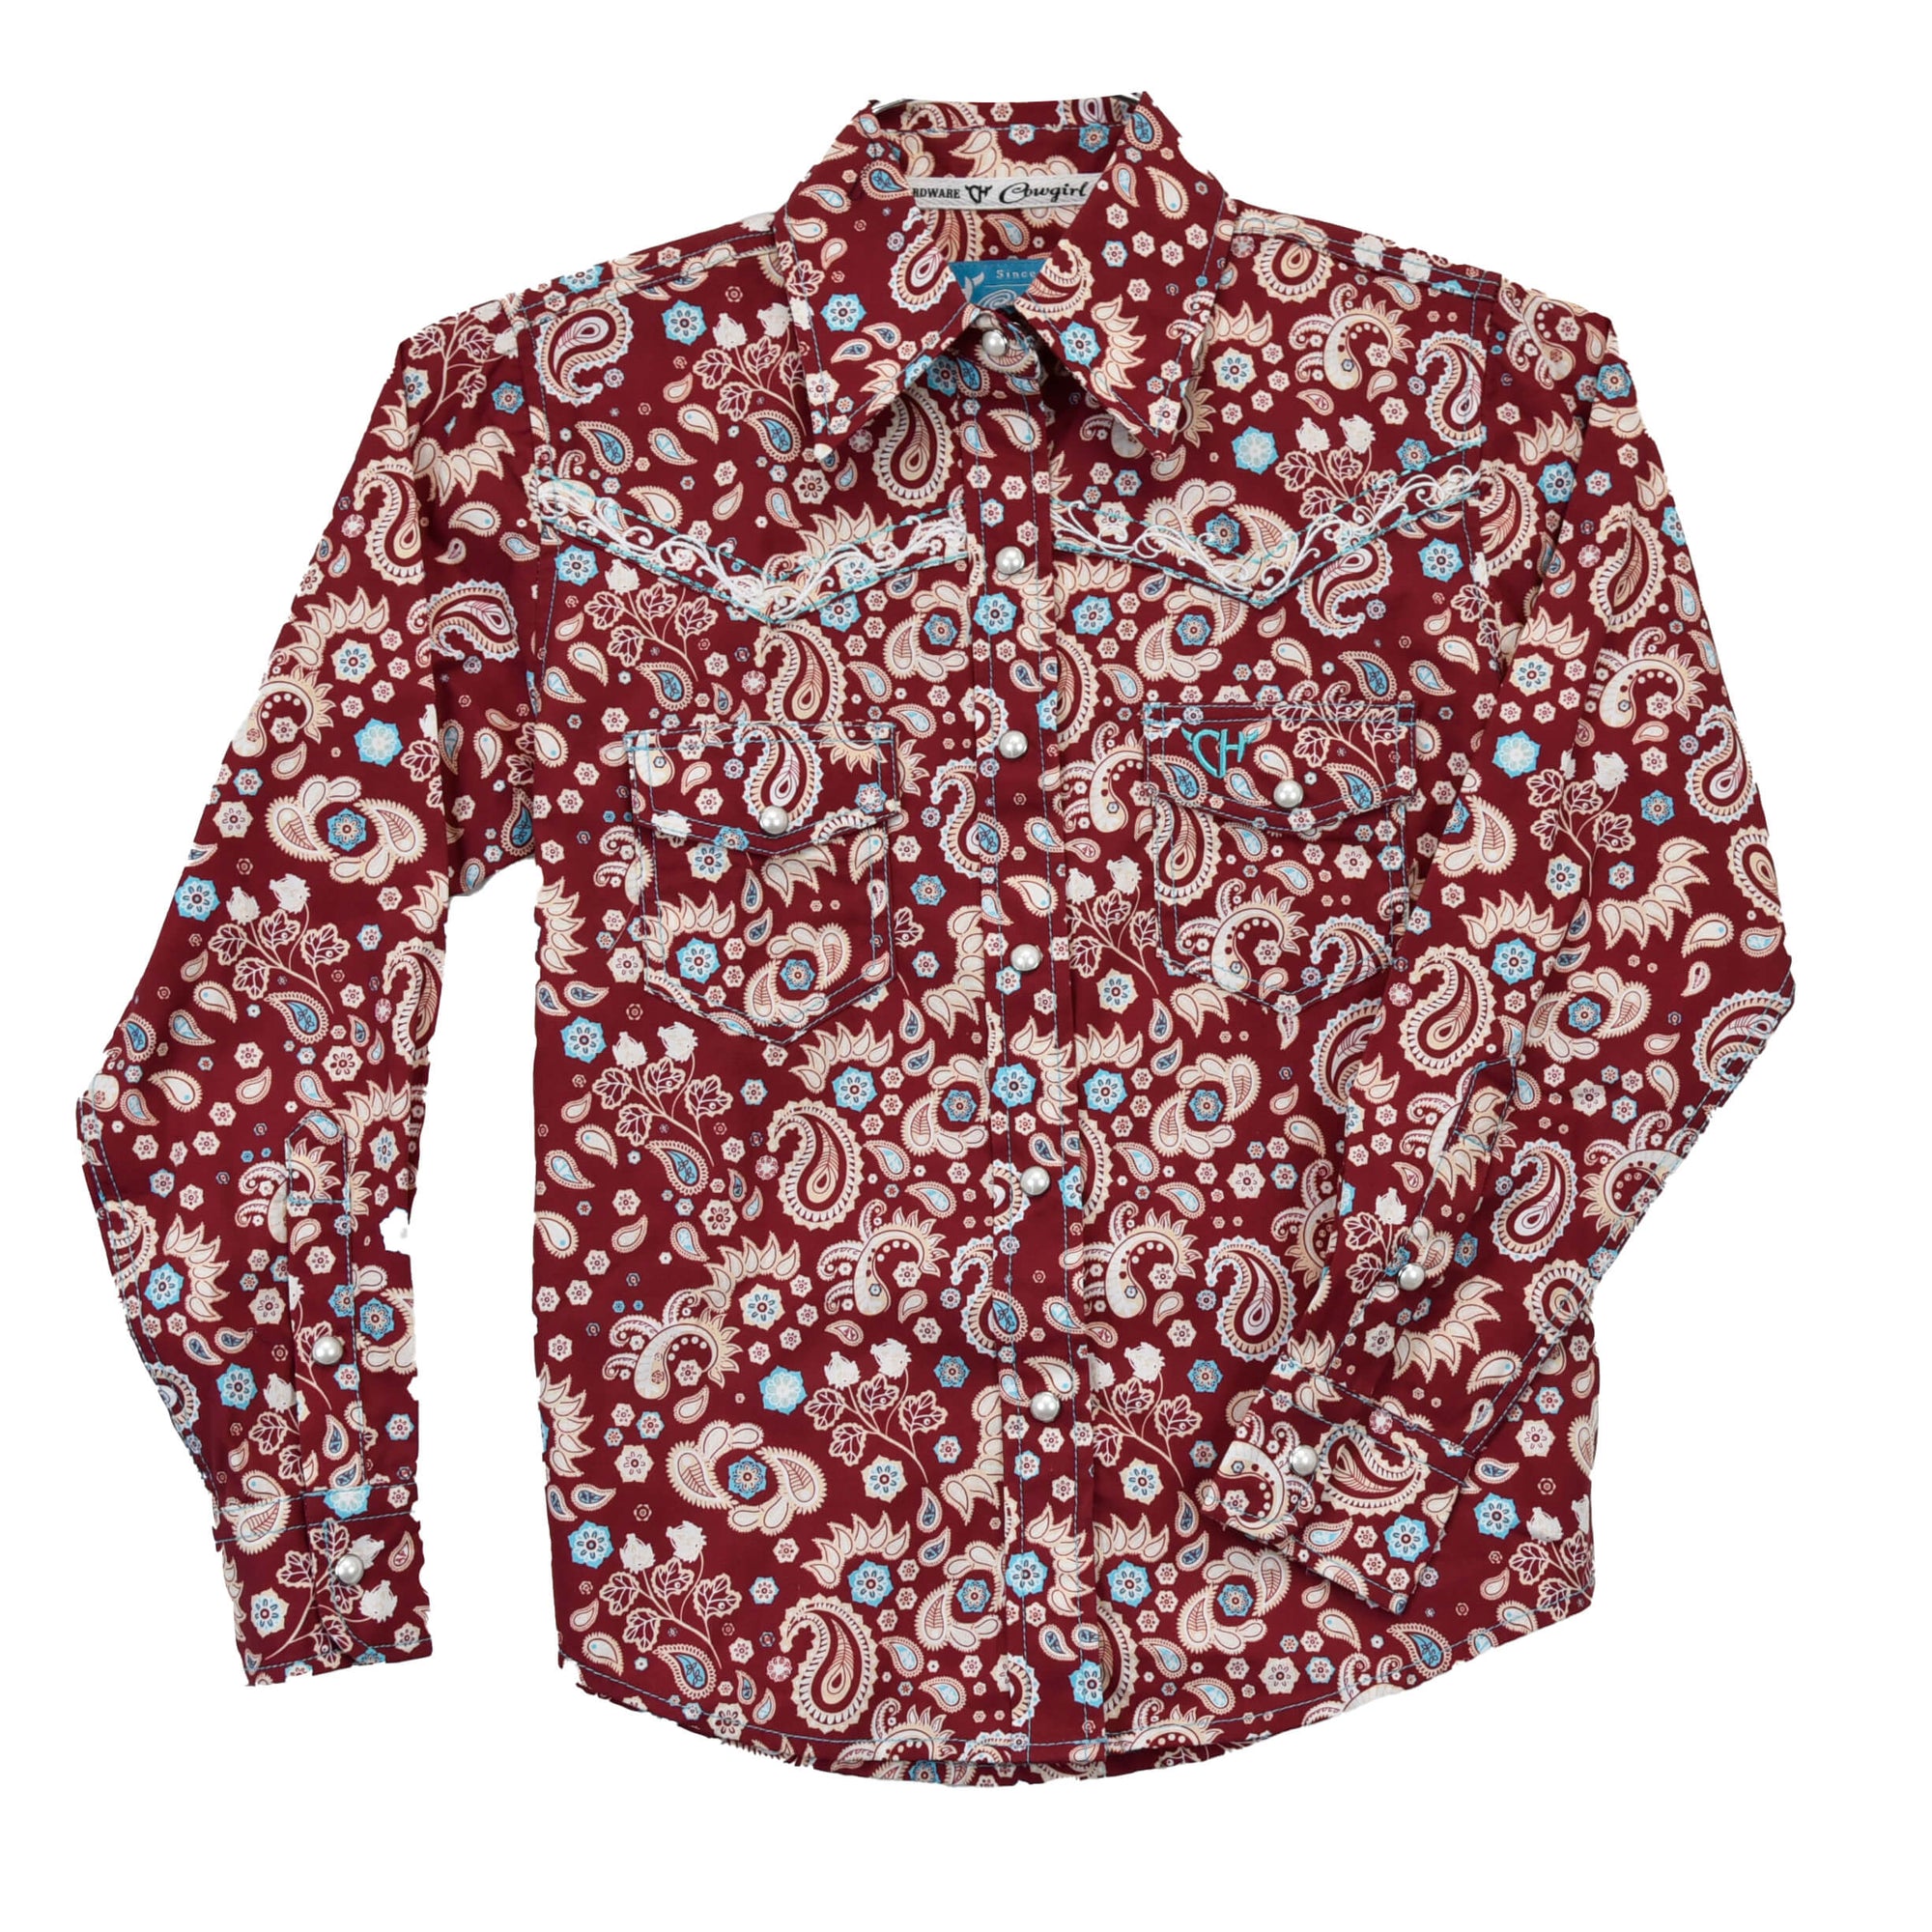 Toddler Cowgirl Hardware Burgundy Paisley Print Long Sleeve Western Shirt with pearl snaps from Cowboy Hardware